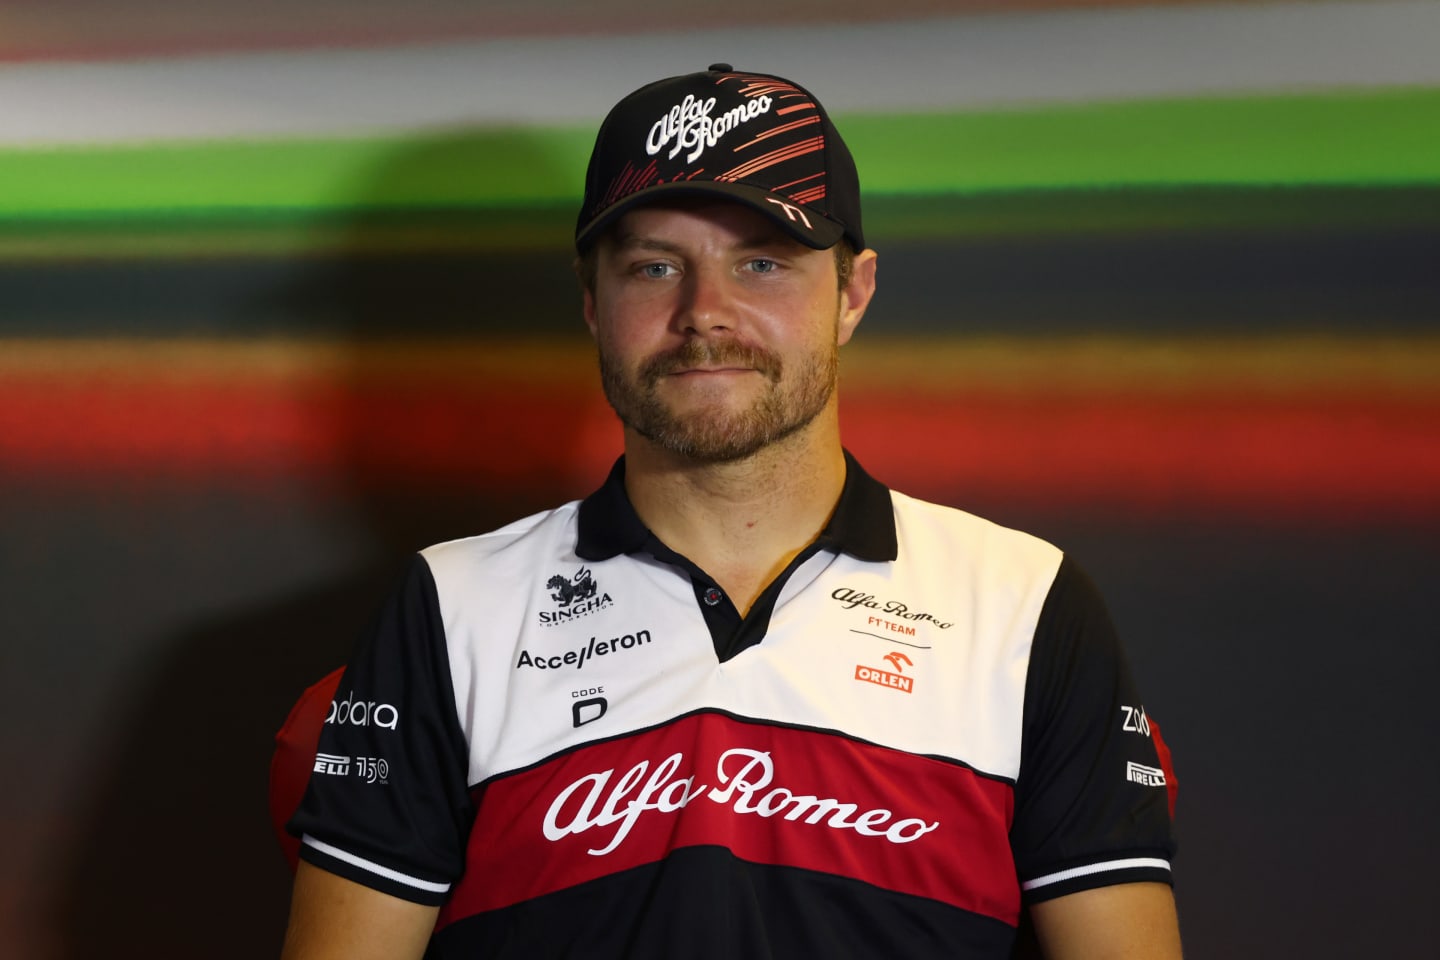 BUDAPEST, HUNGARY - JULY 28: Valtteri Bottas of Finland and Alfa Romeo F1 looks on in the Drivers Press Conference during previews ahead of the F1 Grand Prix of Hungary at Hungaroring on July 28, 2022 in Budapest, Hungary. (Photo by Bryn Lennon/Getty Images)